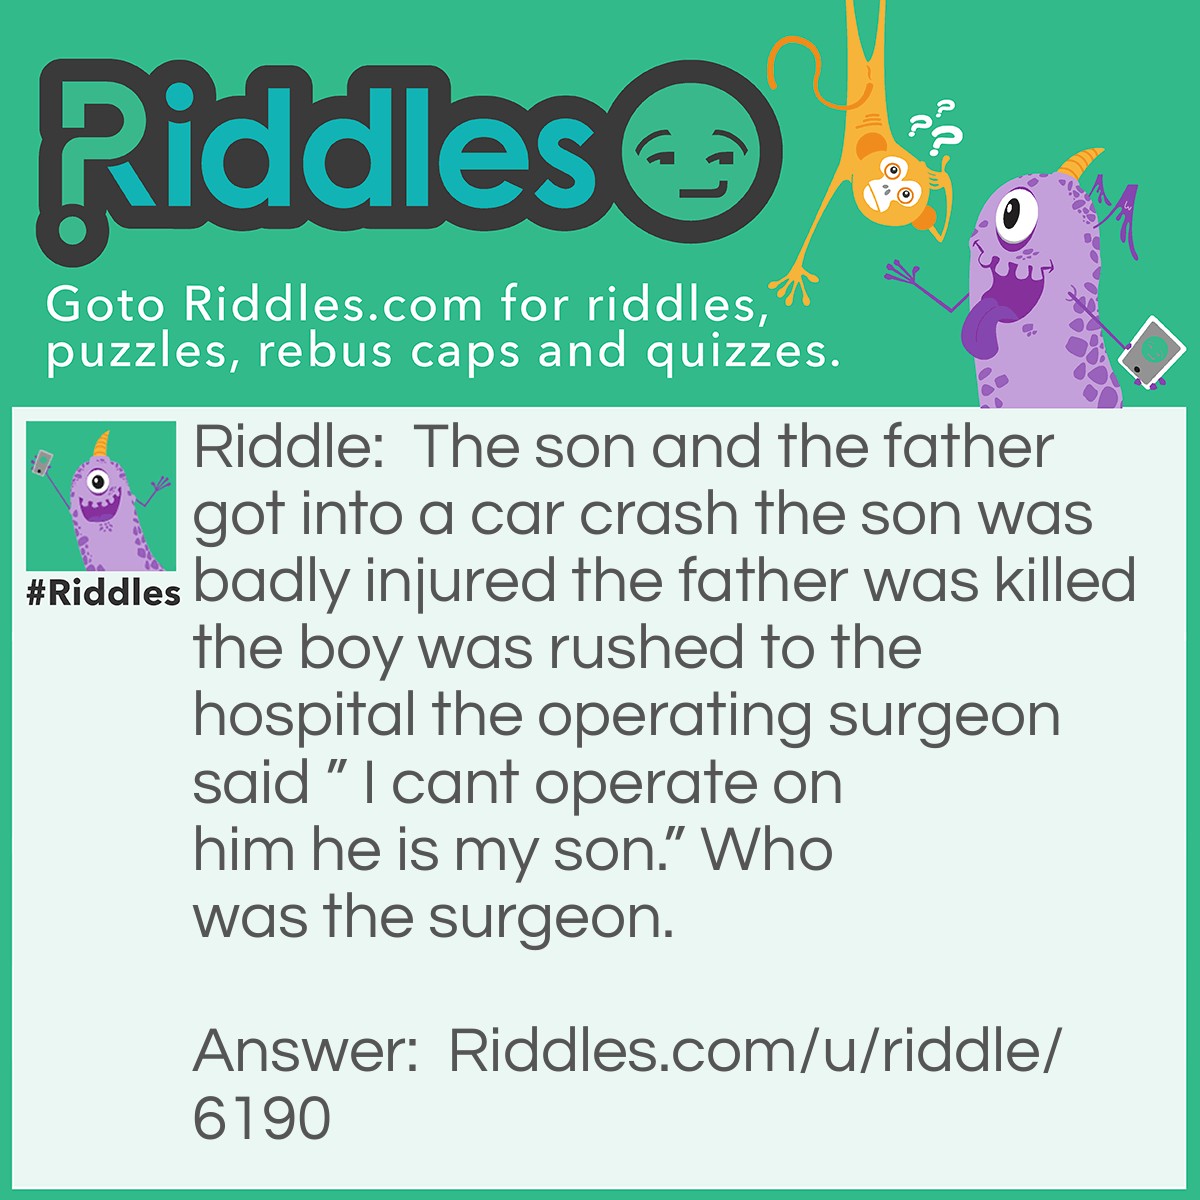 Riddle: The son and the father got into a car crash the son was badly injured the father was killed the boy was rushed to the hospital the operating surgeon said " I cant operate on him he is my son." Who was the surgeon. Answer: The mom is the surgeon.